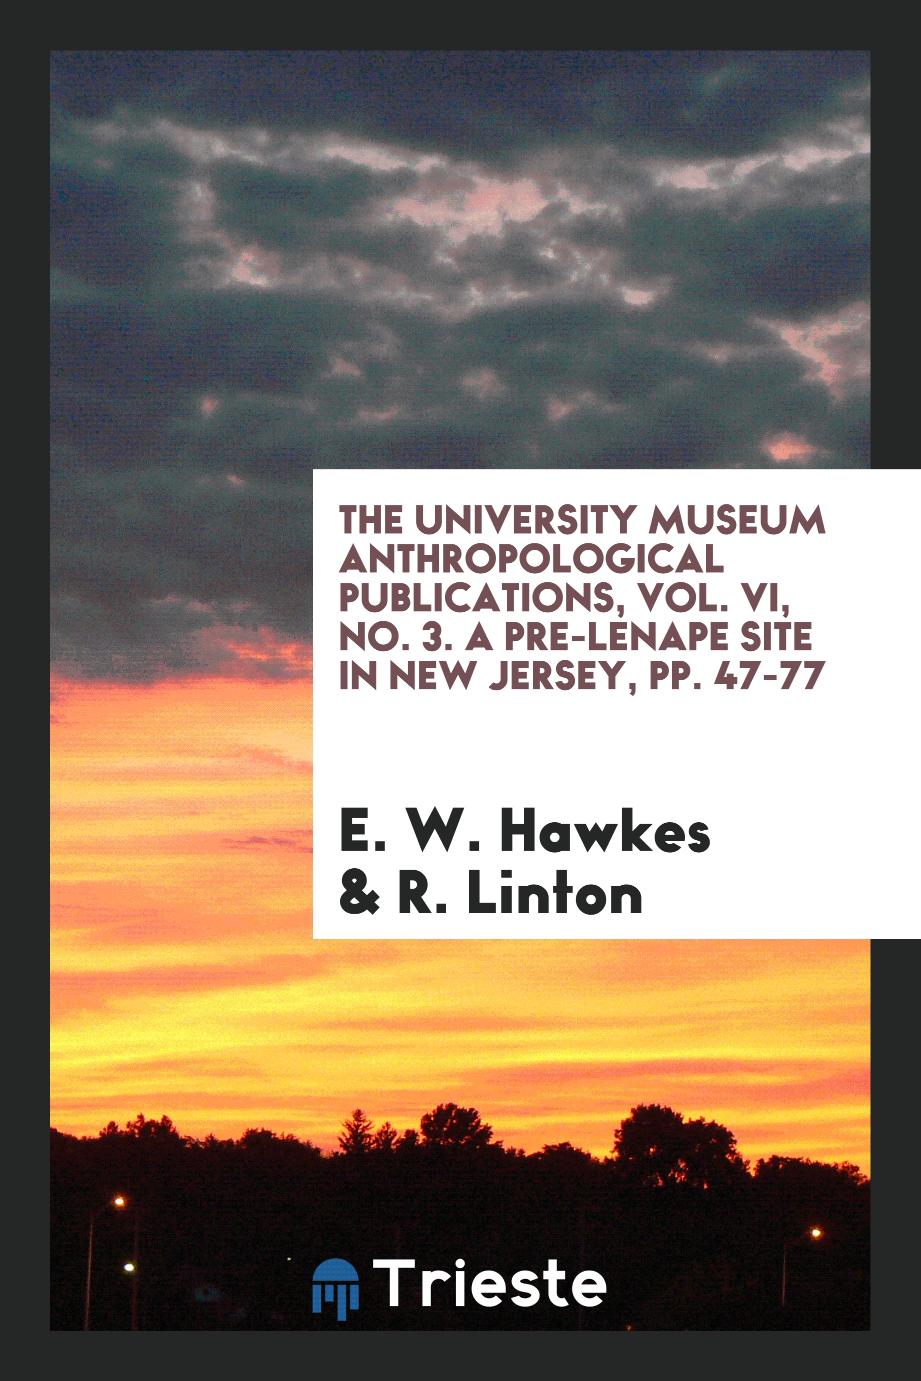 The university museum anthropological publications, vol. VI, No. 3. A Pre-Lenape Site in New Jersey, pp. 47-77